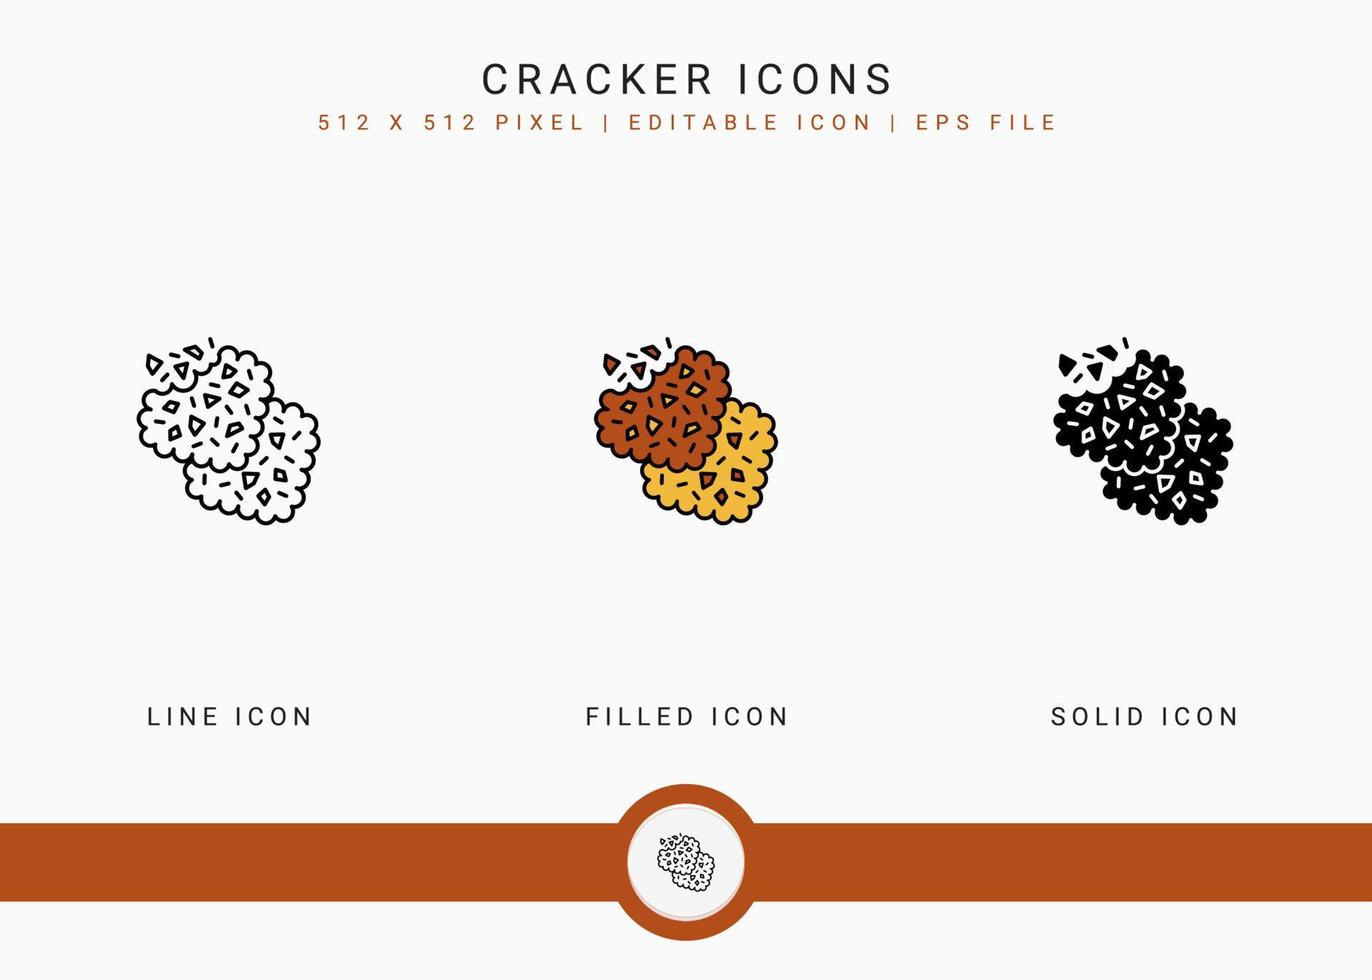 Cracker icons set vector illustration with solid icon line style. Cookie bite concept. Editable stroke icon on isolated background for web design, user interface, and mobile app